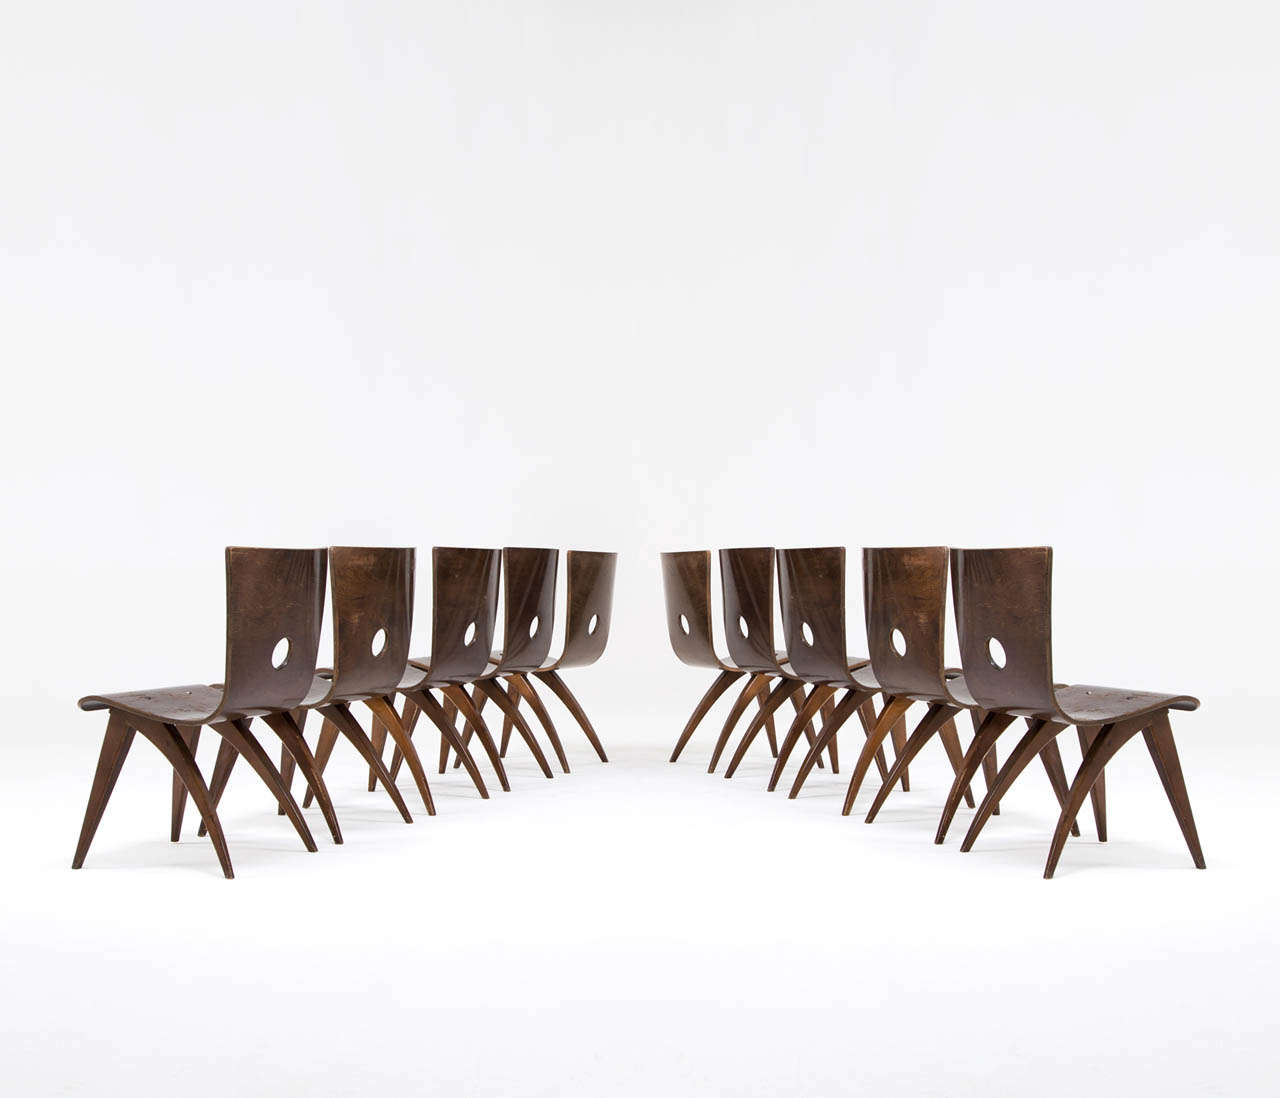 Dining room chairs, in plywood, for Van Os, the Netherlands, 1950s. 

Highly rare set of Van Os dining room chairs, made in the Netherlands during the 1950s. These chairs, made from dark stained beech plywood, are hard to find and have and